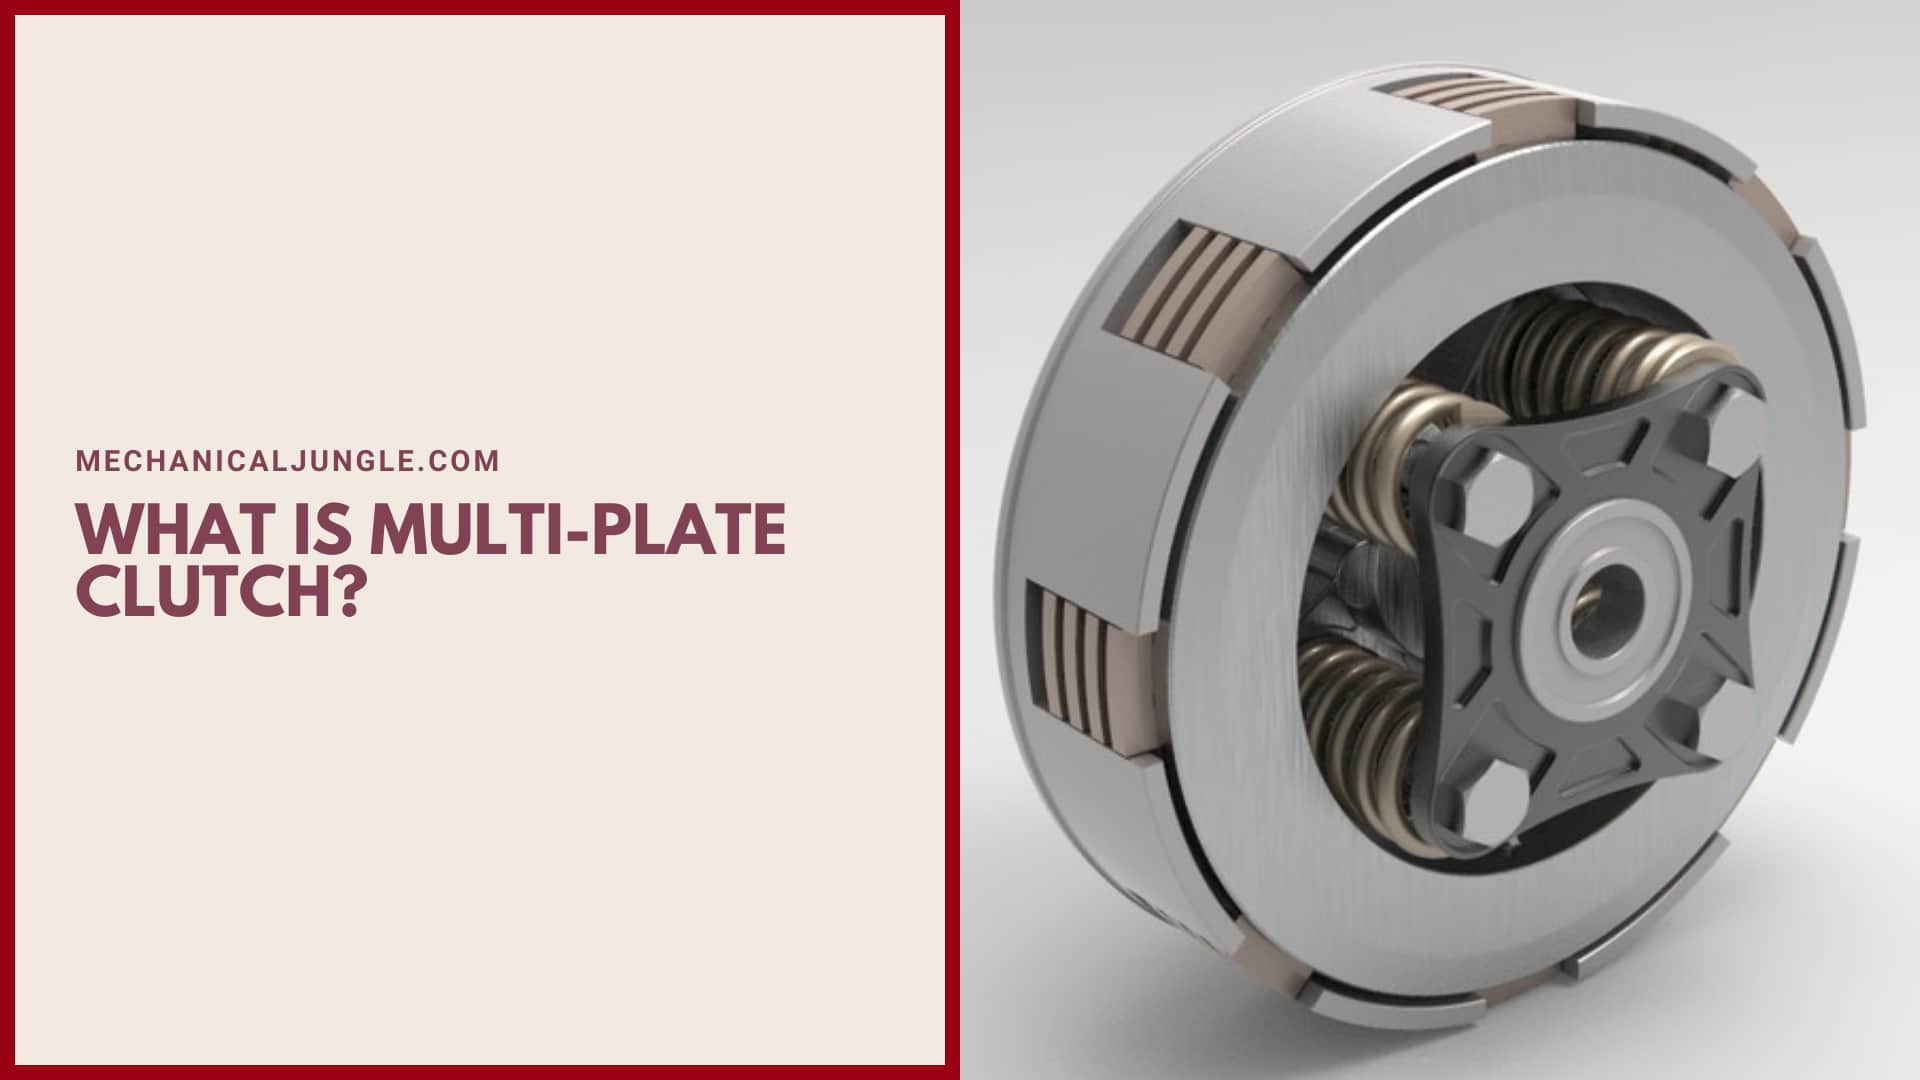 What Is Multi-Plate Clutch?